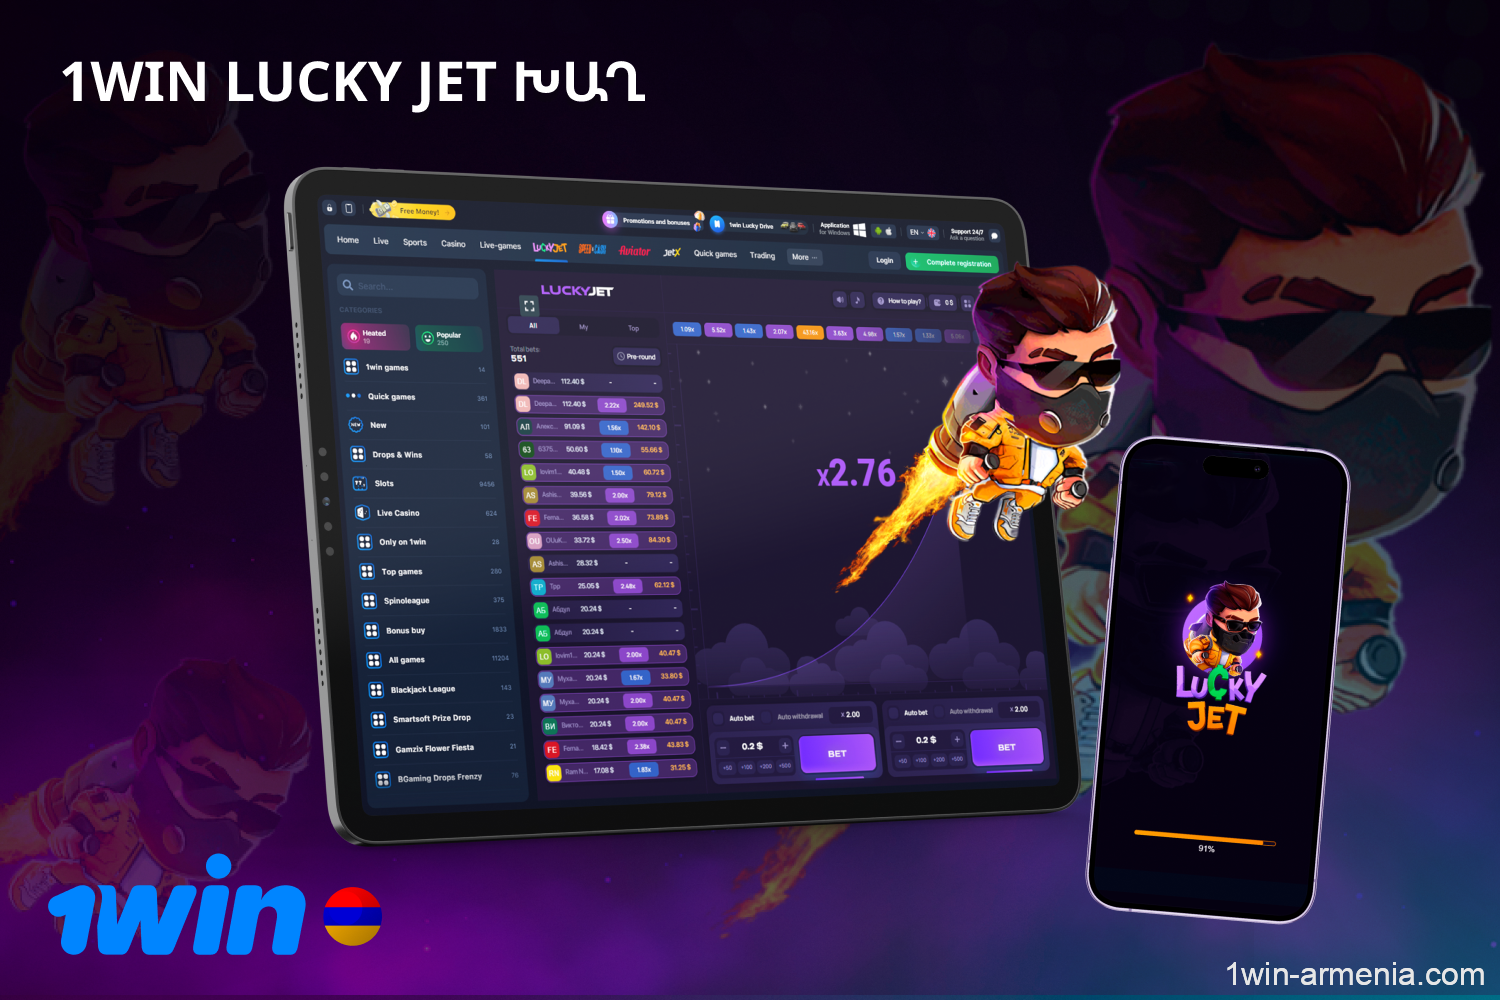 Interesting online game 1win Lucky Jet is available in Armenia on the website and application